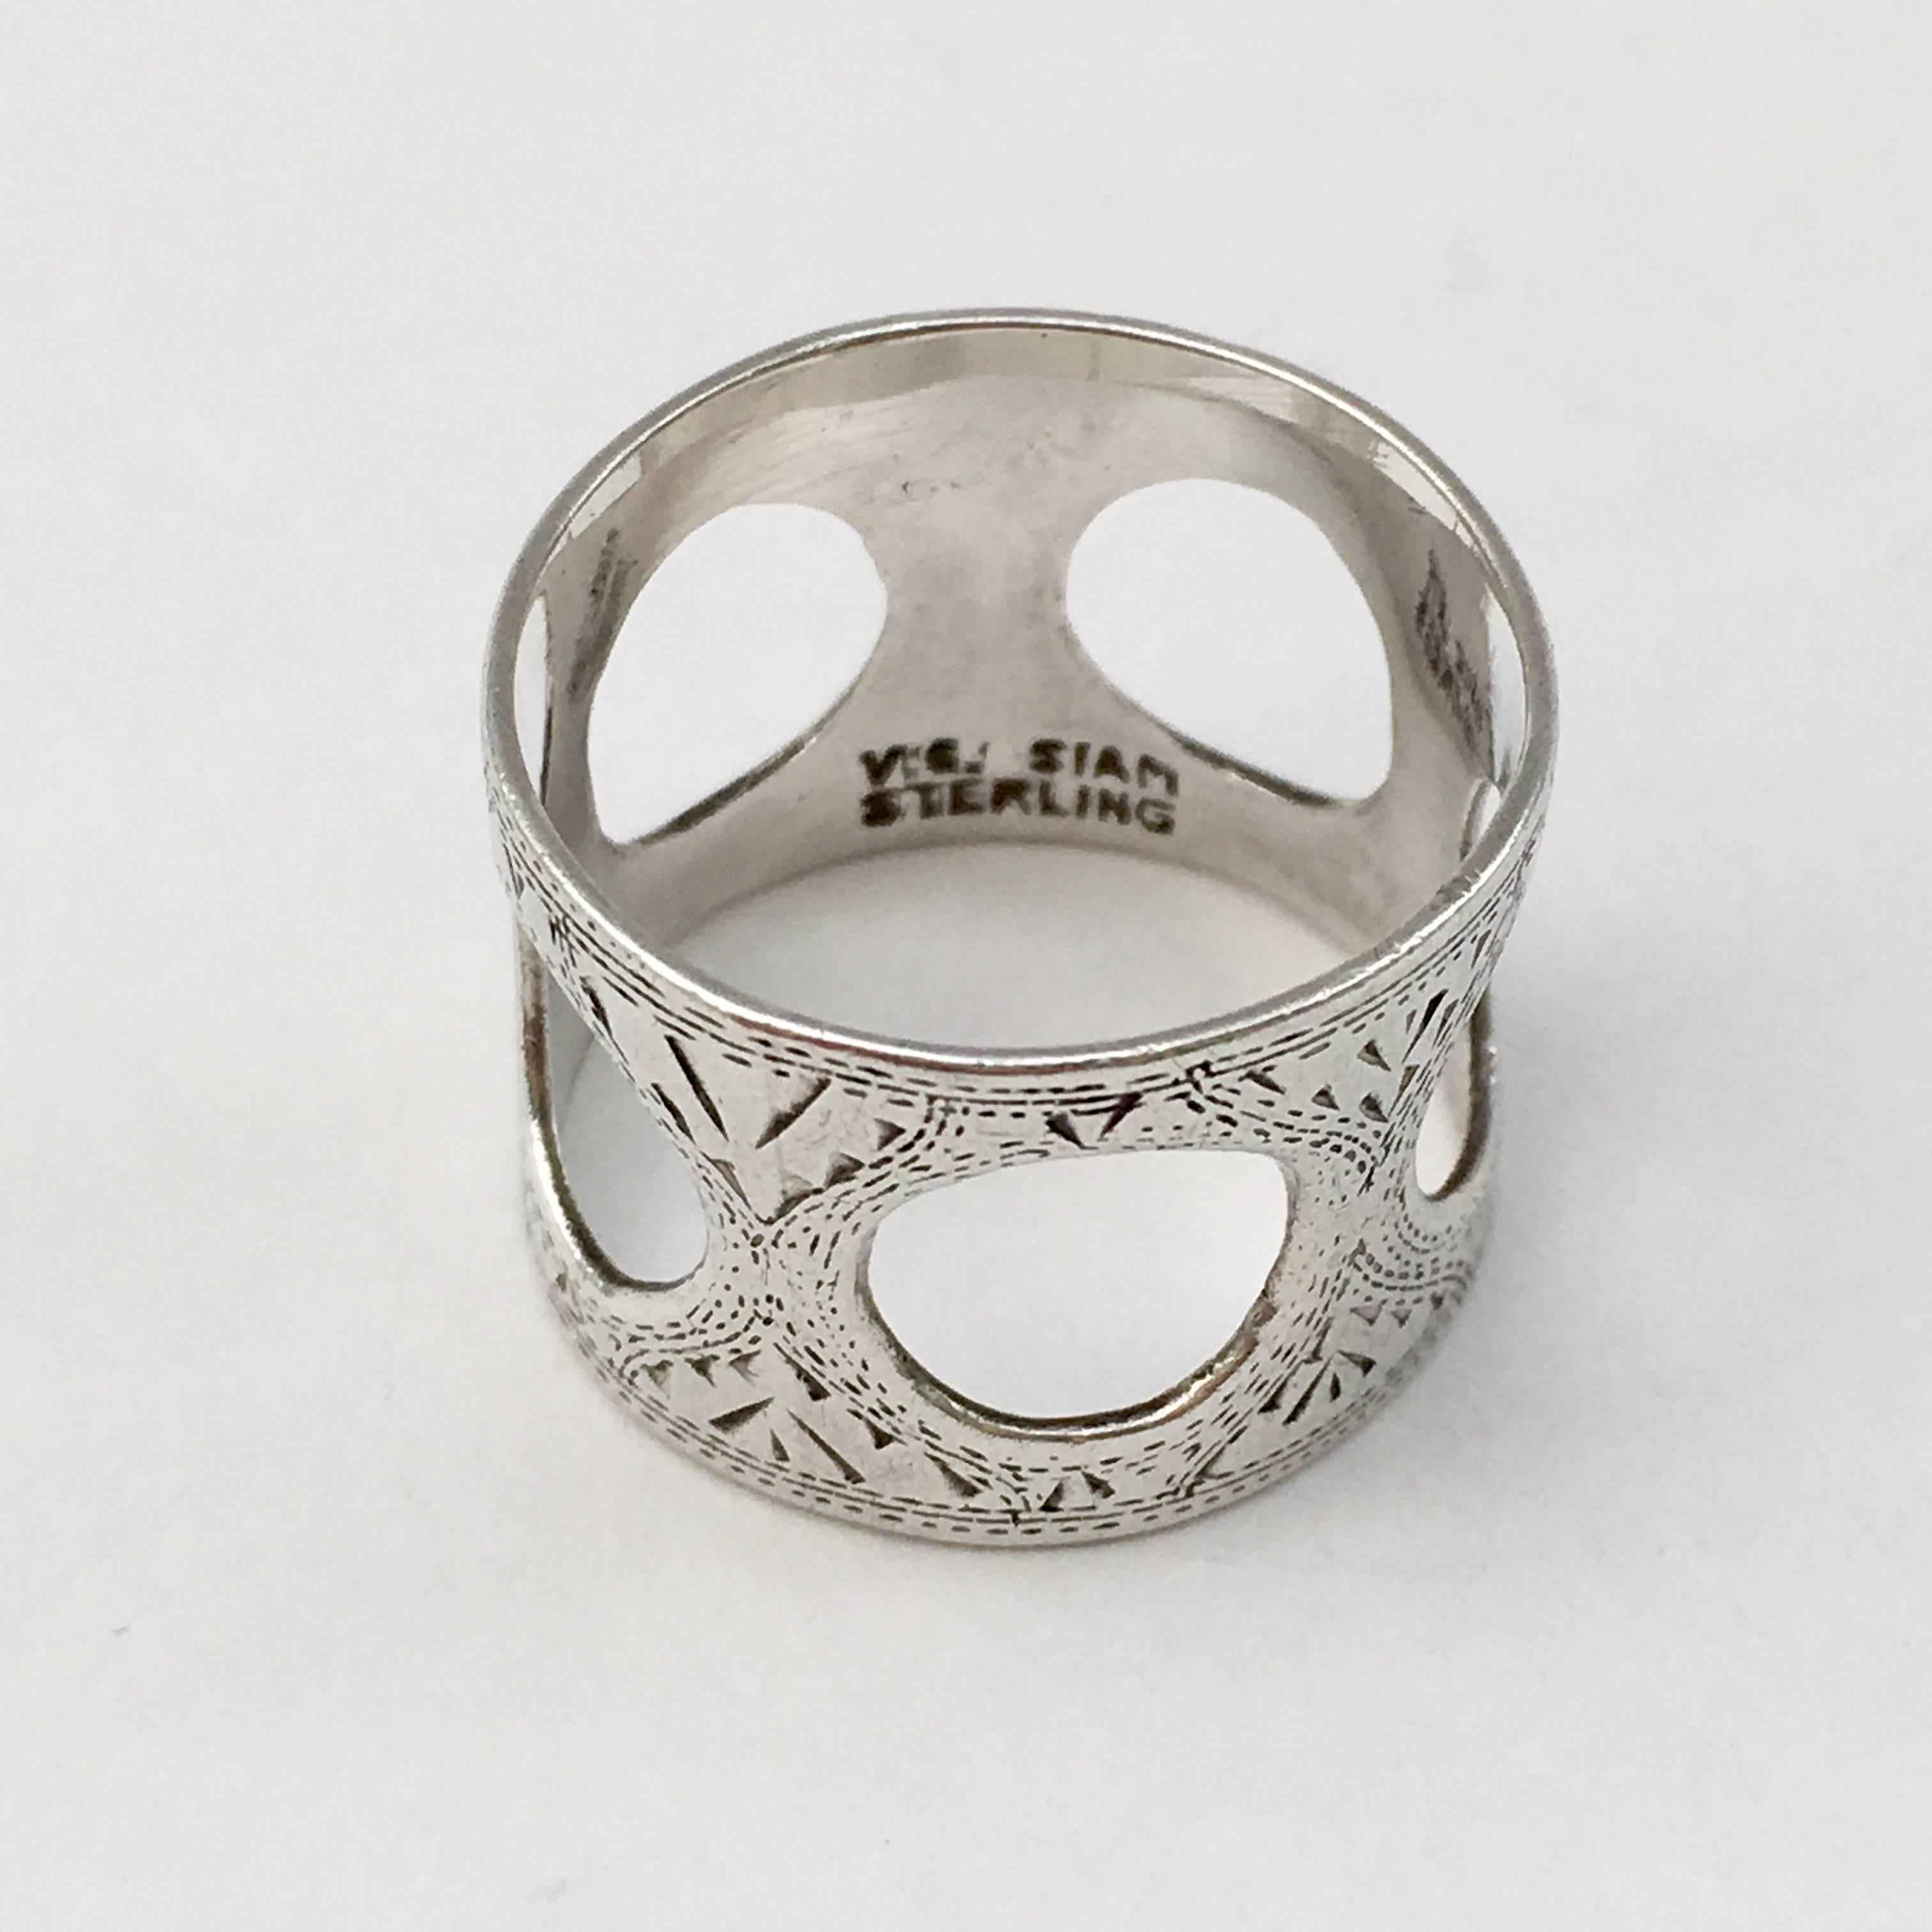 Women's or Men's Engraved Ring Circular Coin Cutouts Wide Band Siam Silver Vintage Jewelry